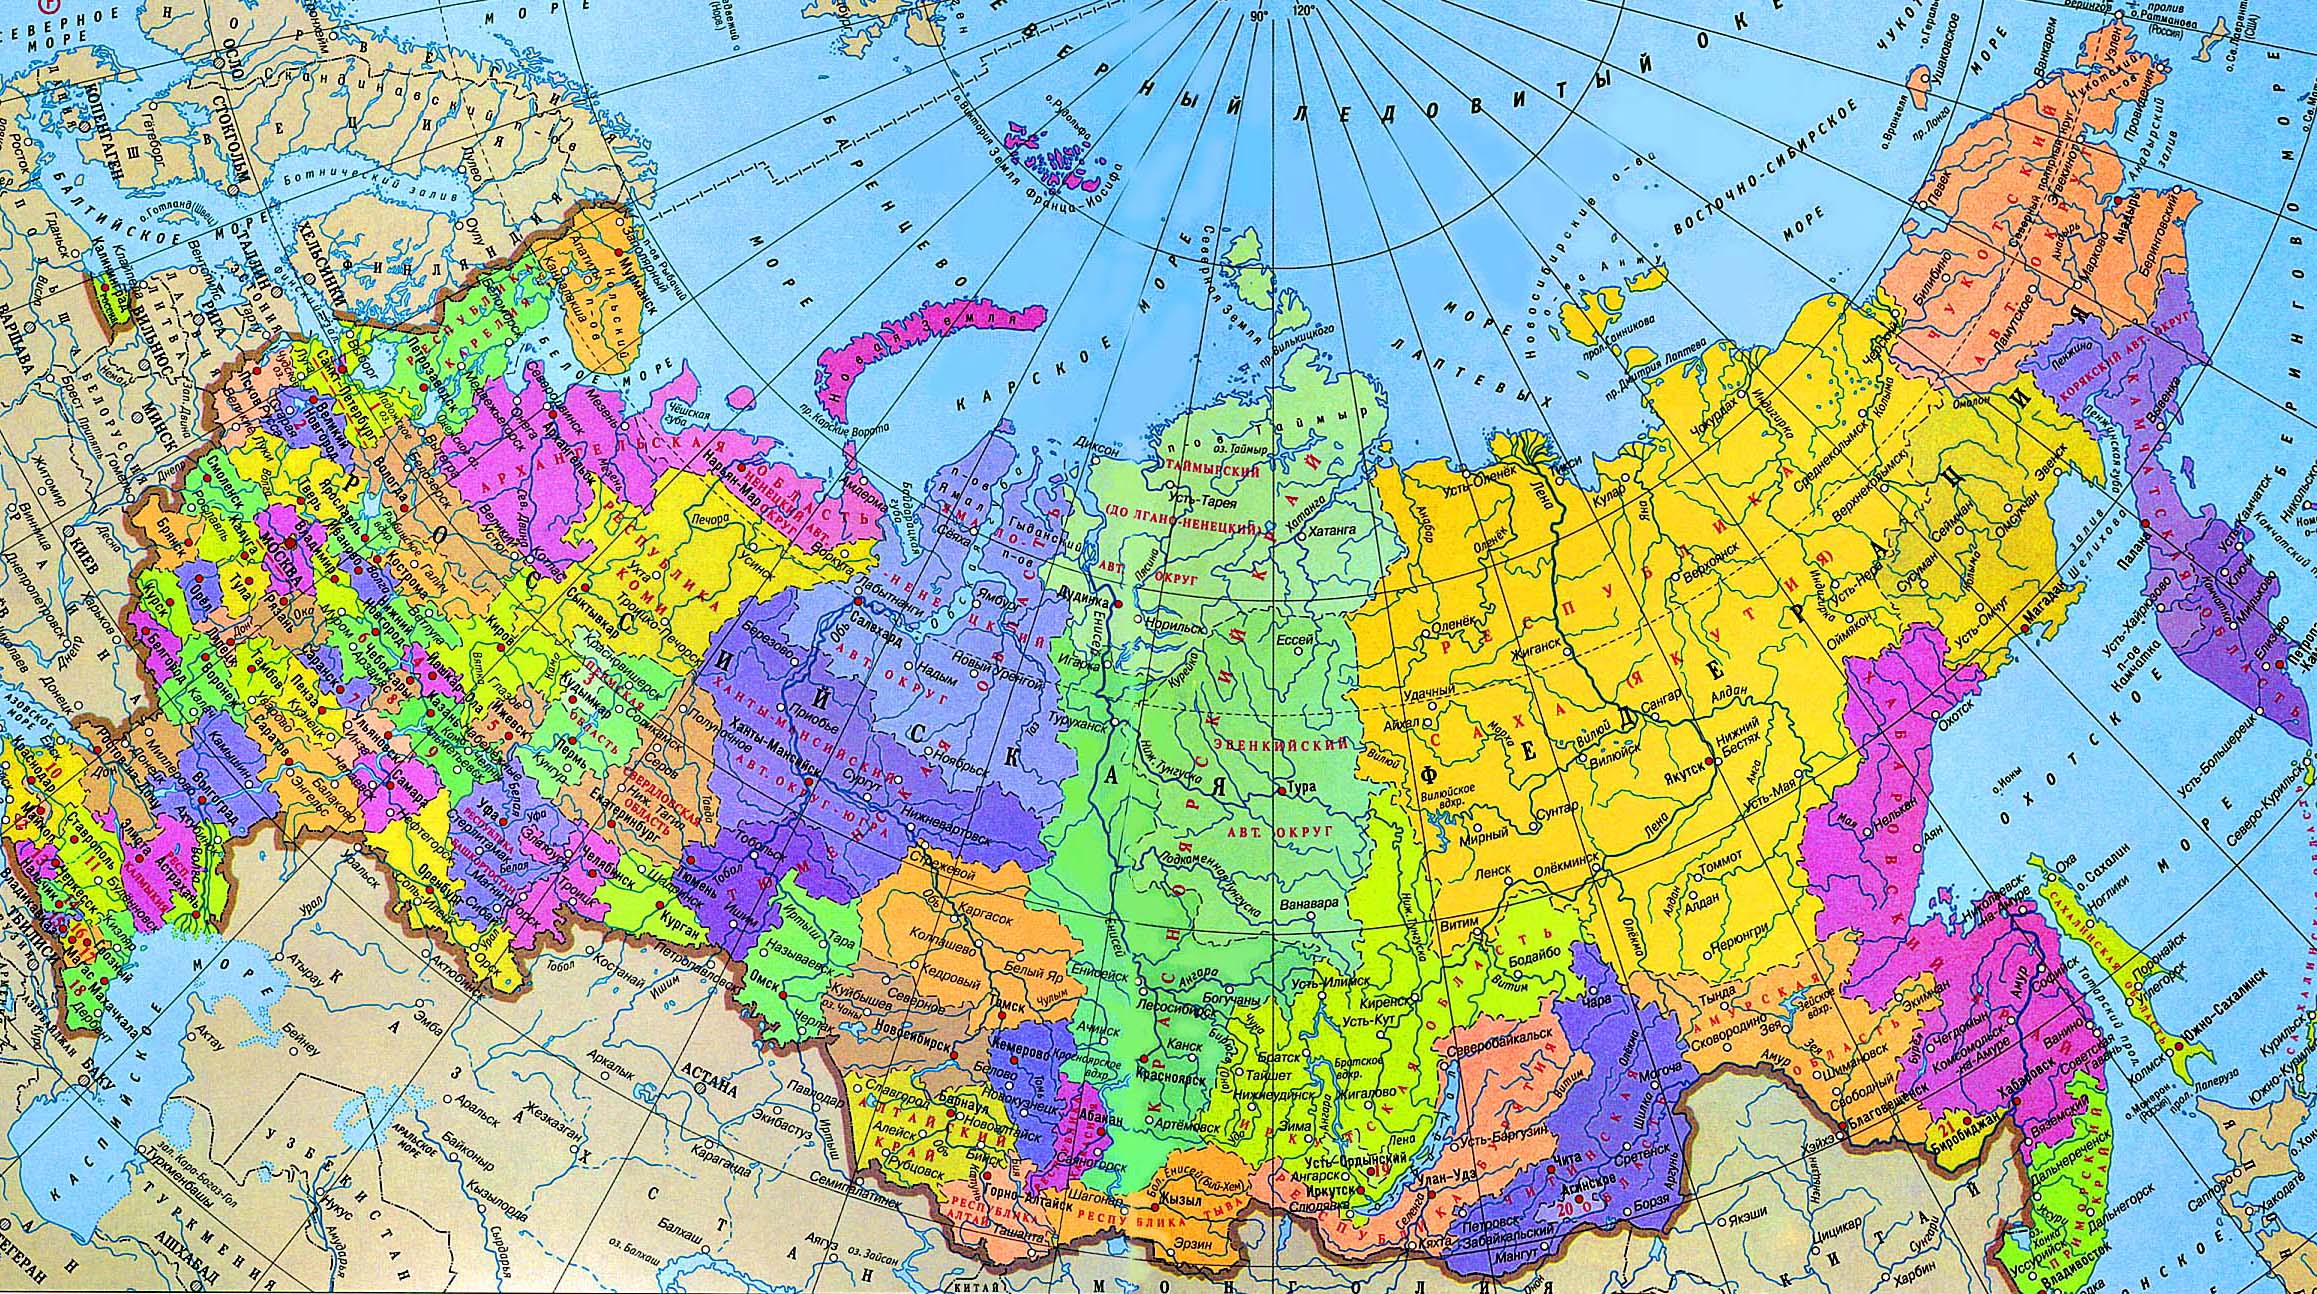 Maps of Russia | Detailed map of Russia with cities and regions | Map